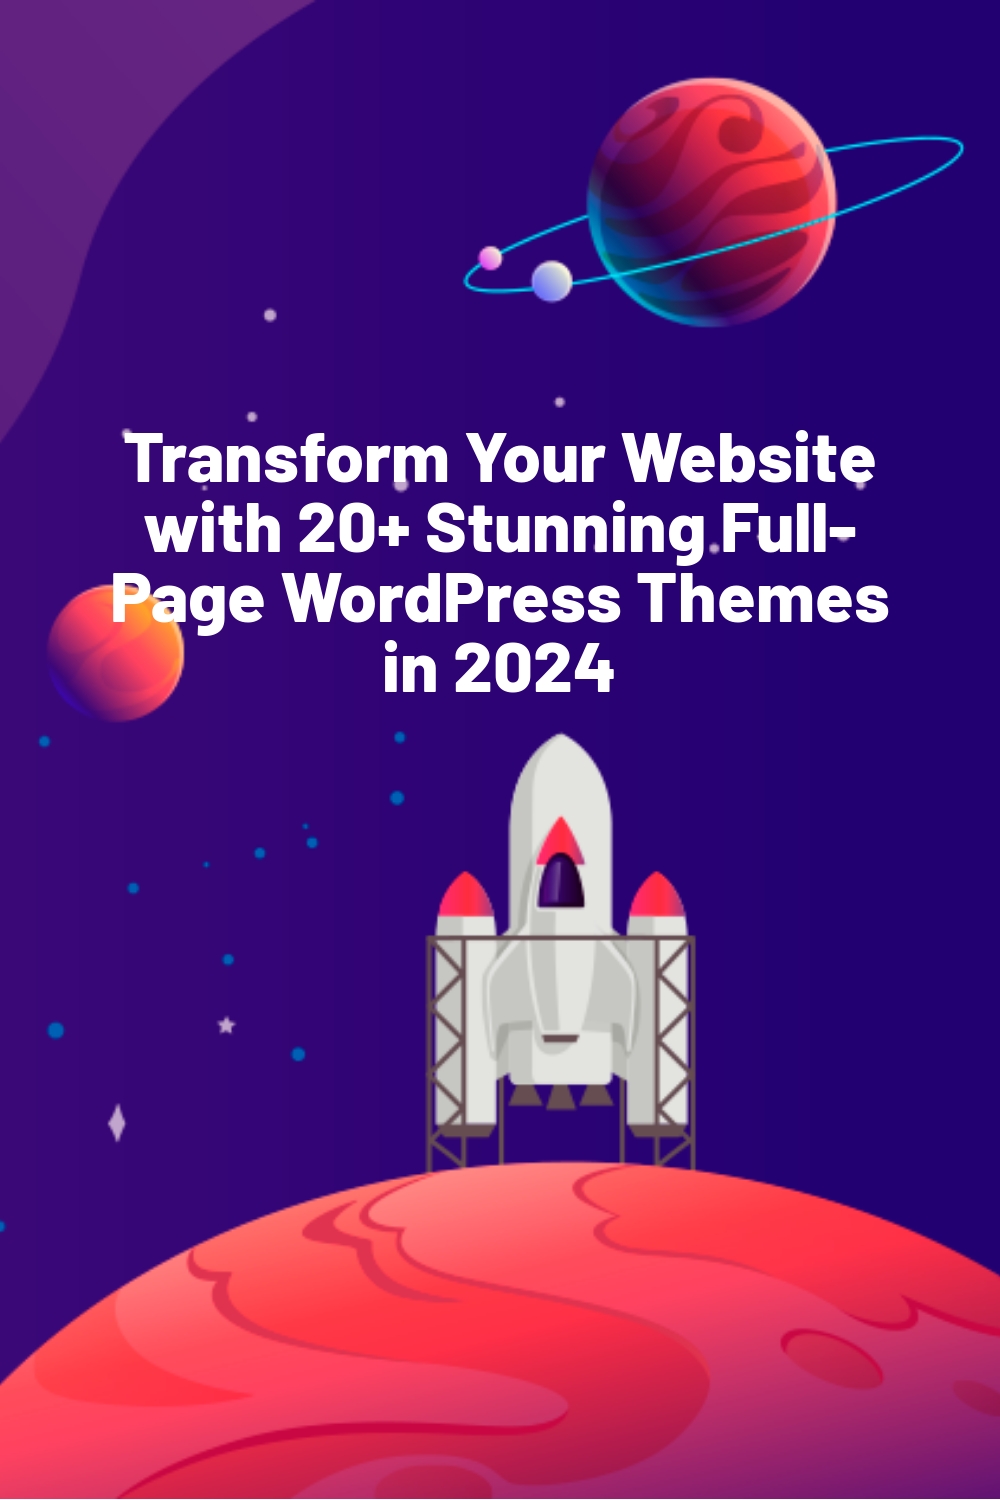 Transform Your Website with 20+ Stunning Full-Page WordPress Themes in 2024